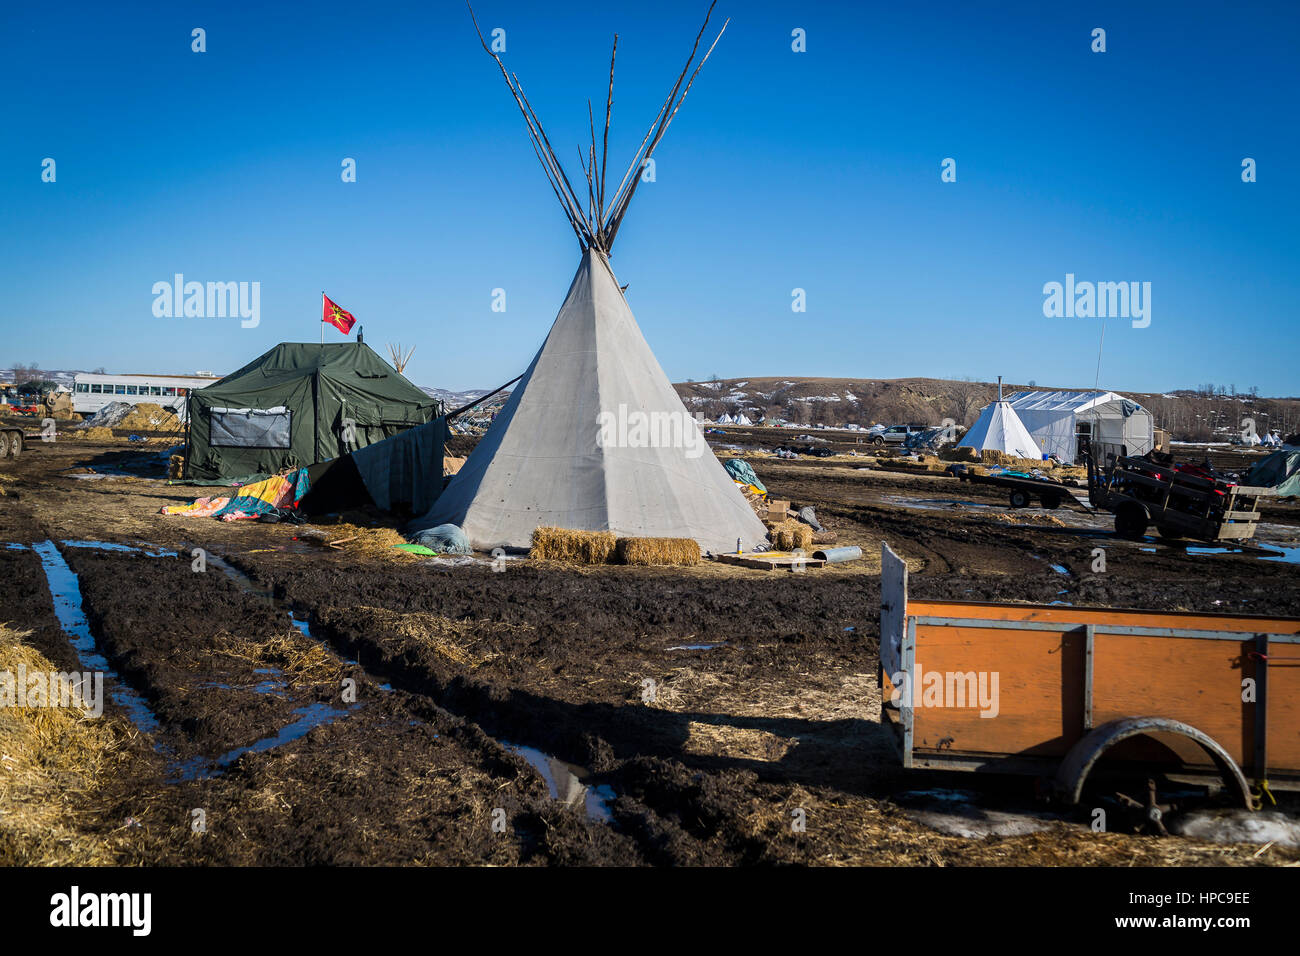 On February 20, 2017, water protectors in Standing Rock, North Dakota, continued their cleanup effort and attempted to negotiate an extension from being evicted from the Oceti Sakowin Camp, but were told by the Army Corps of Engineers that the notice of eviction would not change.  Hundreds of militarized law enforcement from various agencies, including The US National Guard and Homeland Security, will reportedly raid the camp at 2 p.m. on Wednesday, February 22, 2017 and will arrest all water protectors who refuse to leave.   Photo: Cronos/Michael Nigro Stock Photo